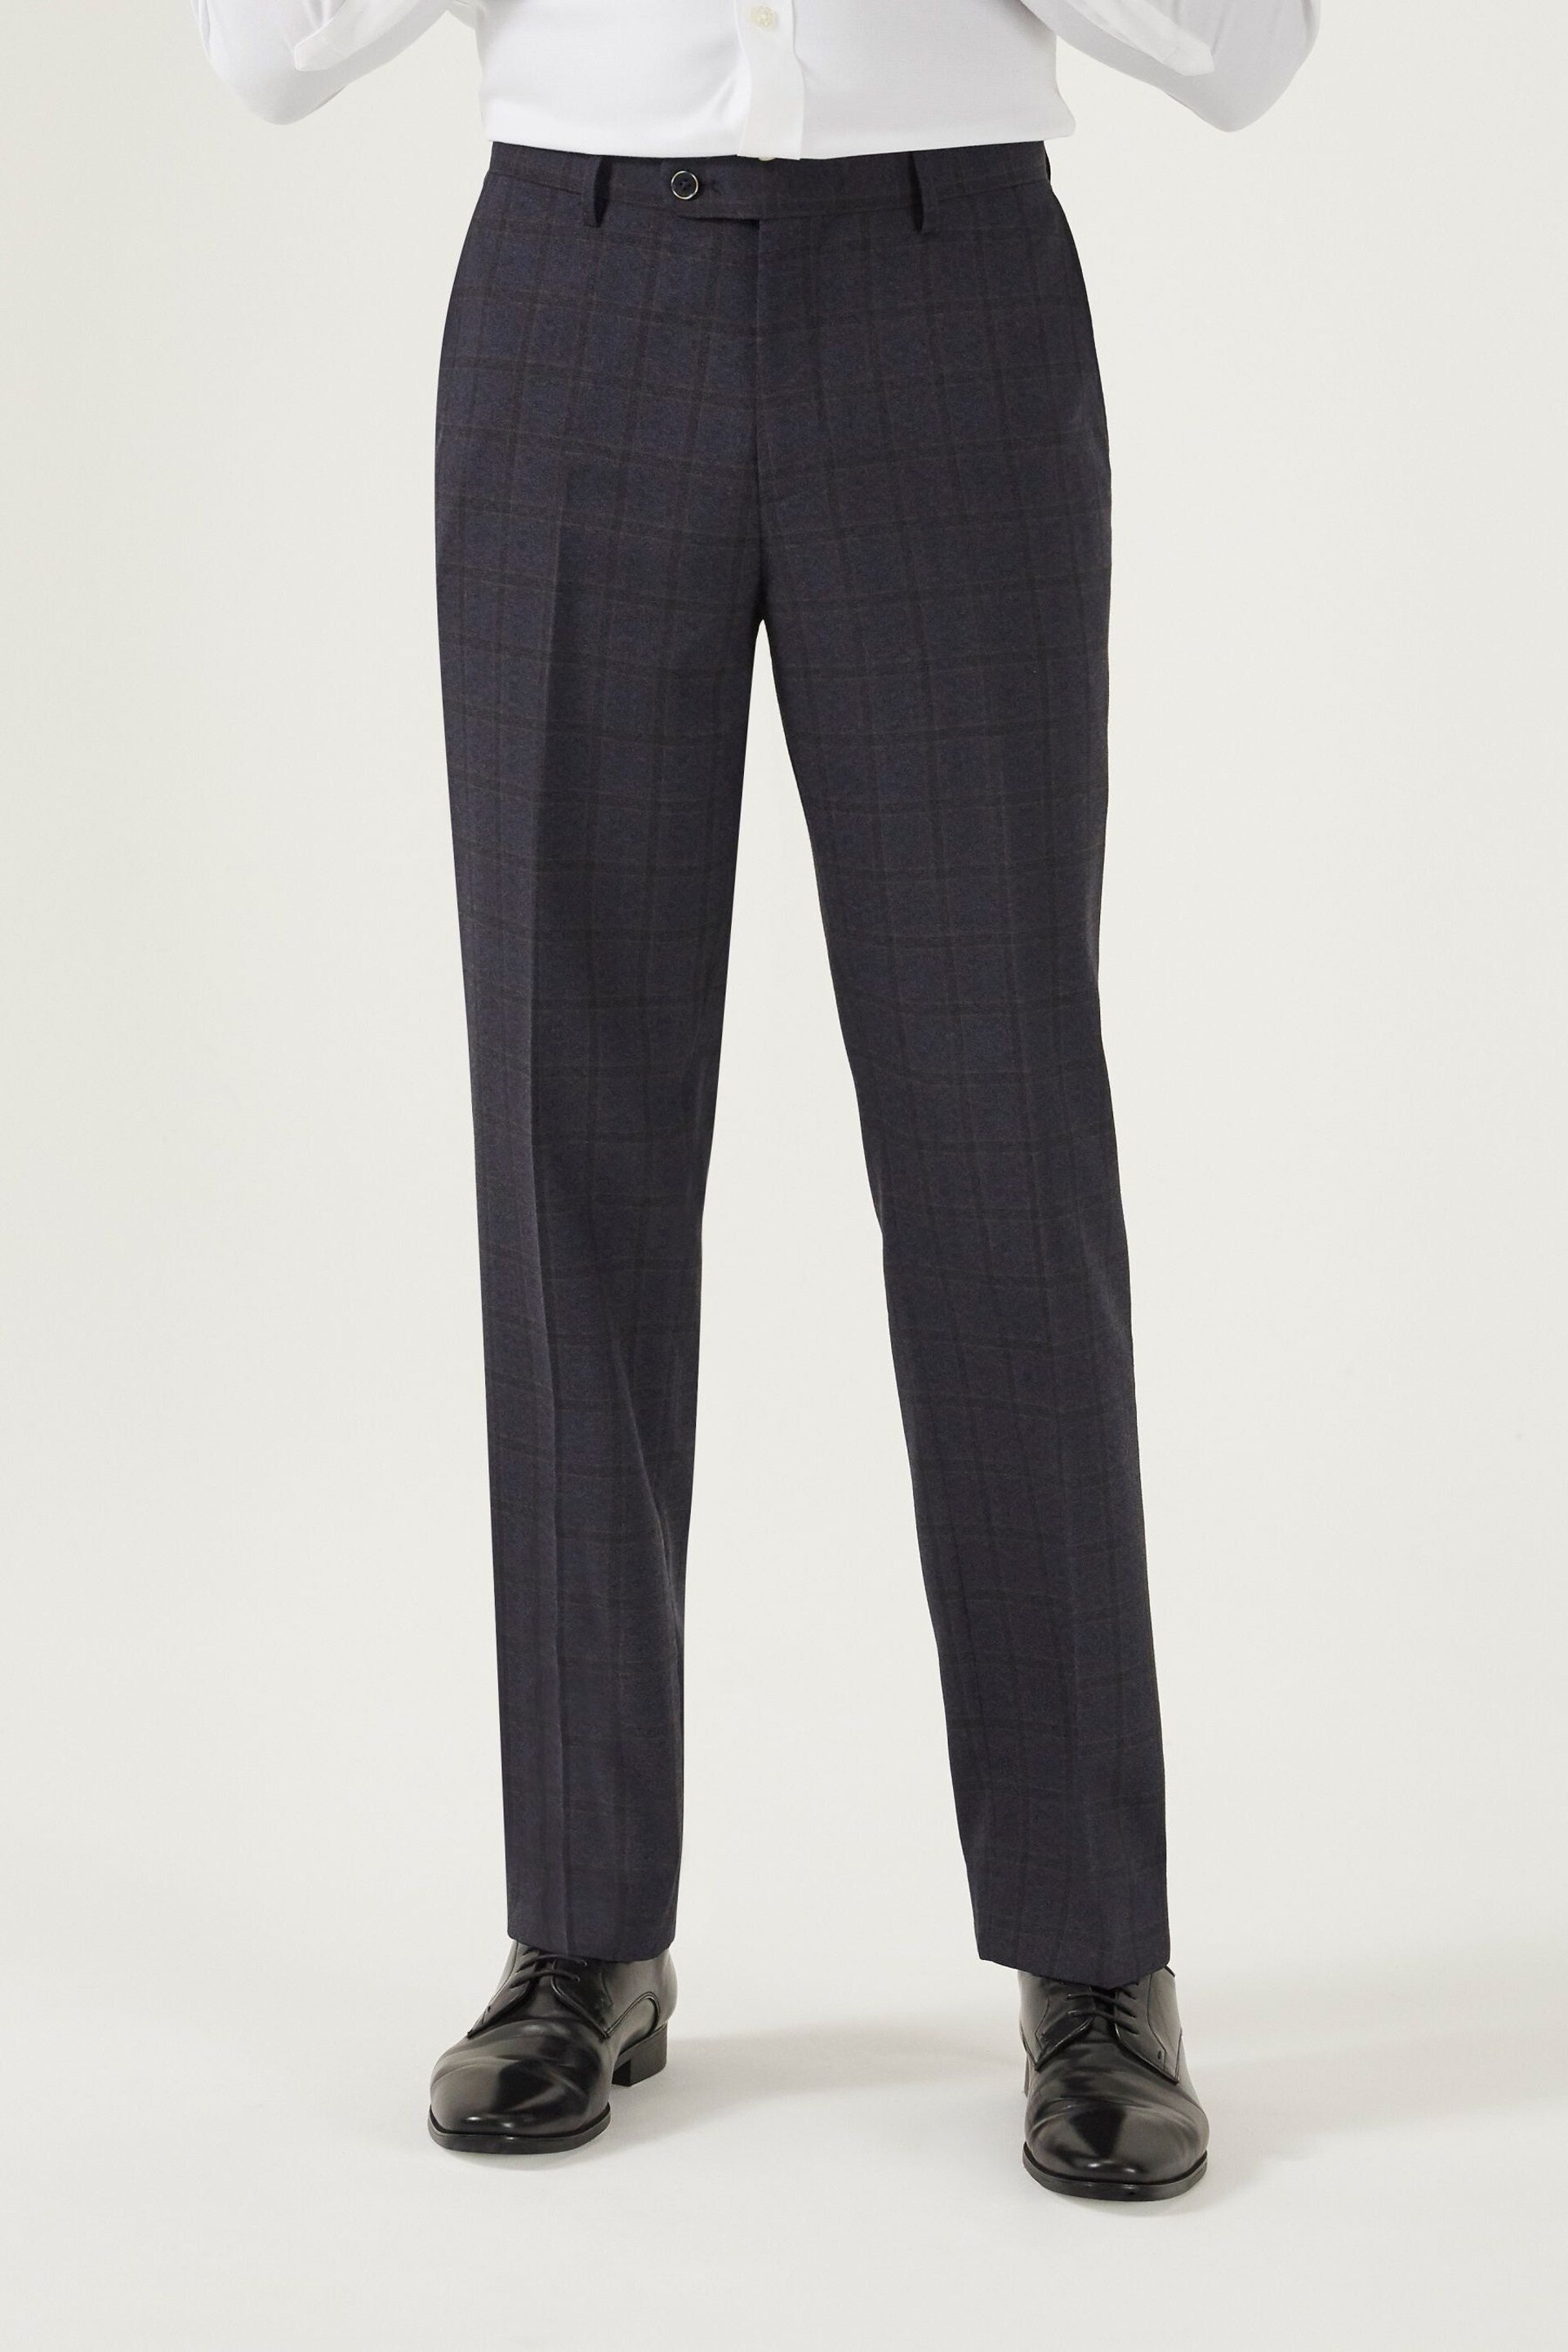 Skopes Curry Navy Blue Check Tailored Fit Suit Trousers - Image 1 of 3